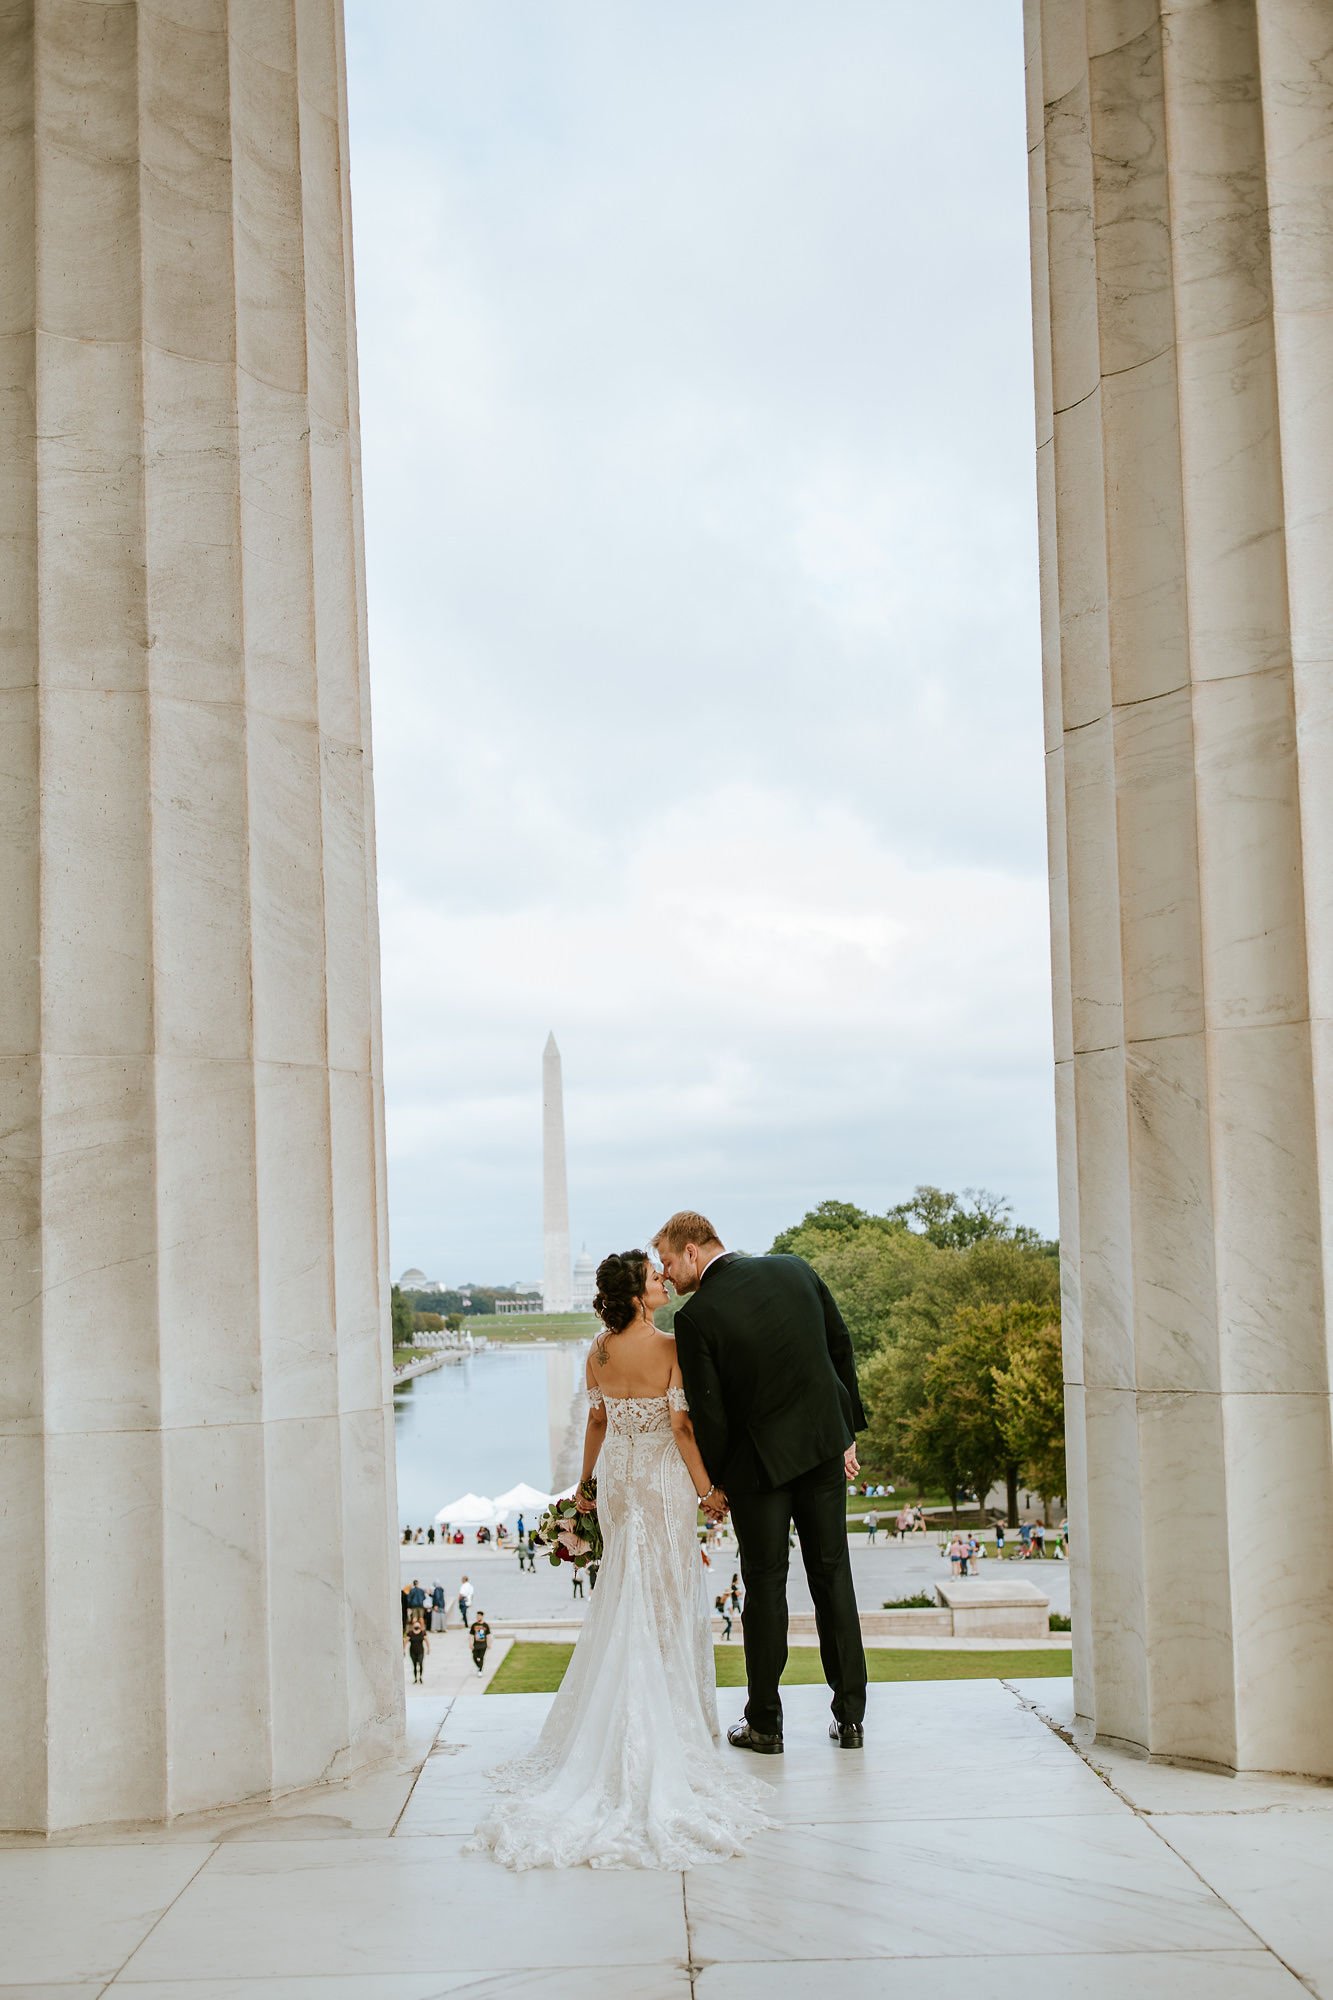 One more at the Lincoln Memorial